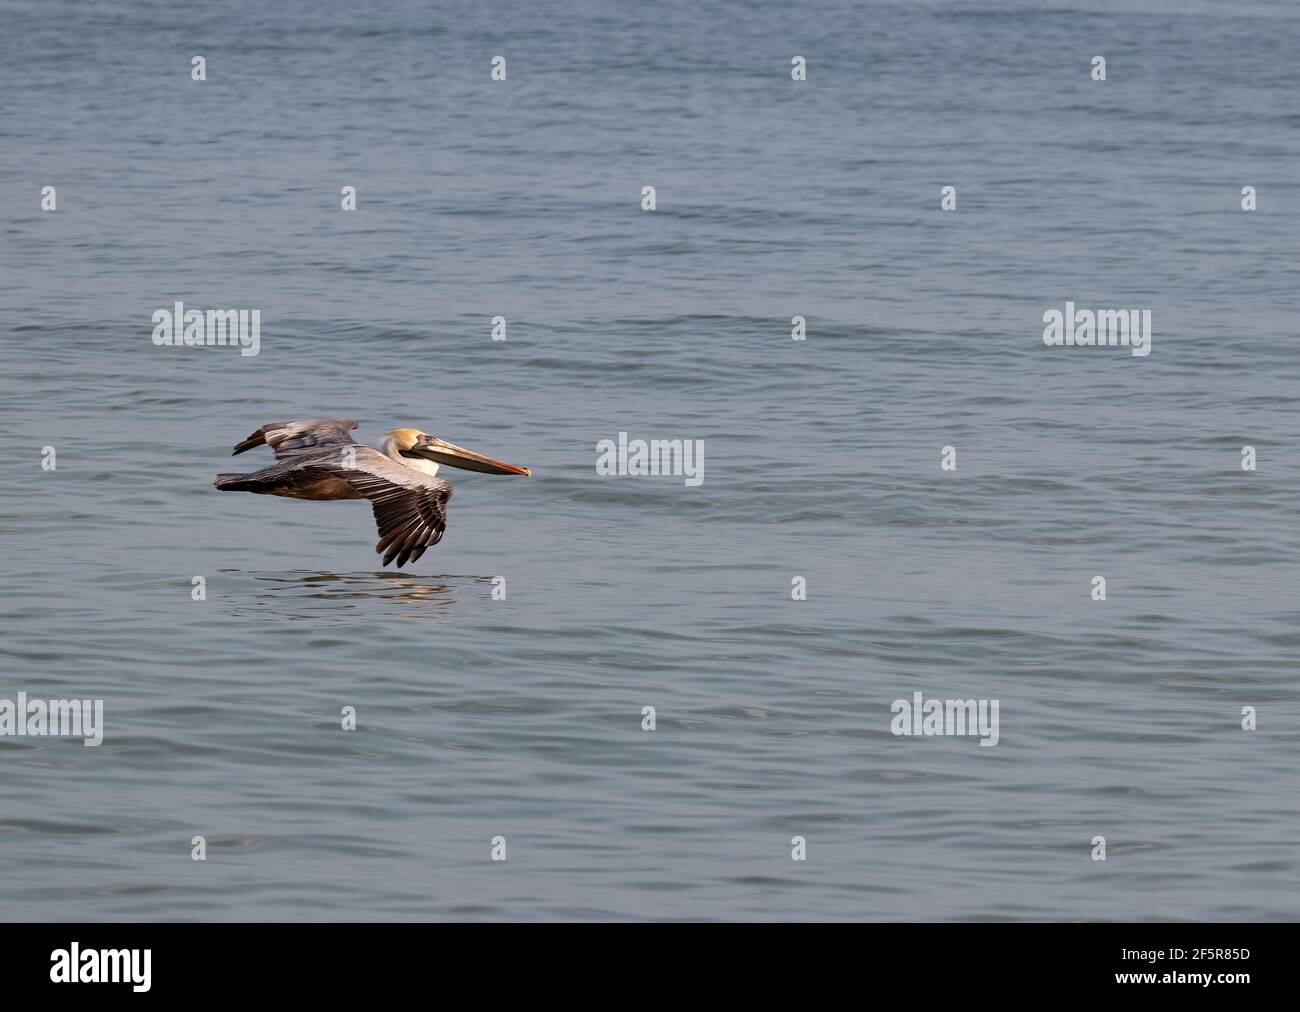 Pelican flying low over the water Stock Photo